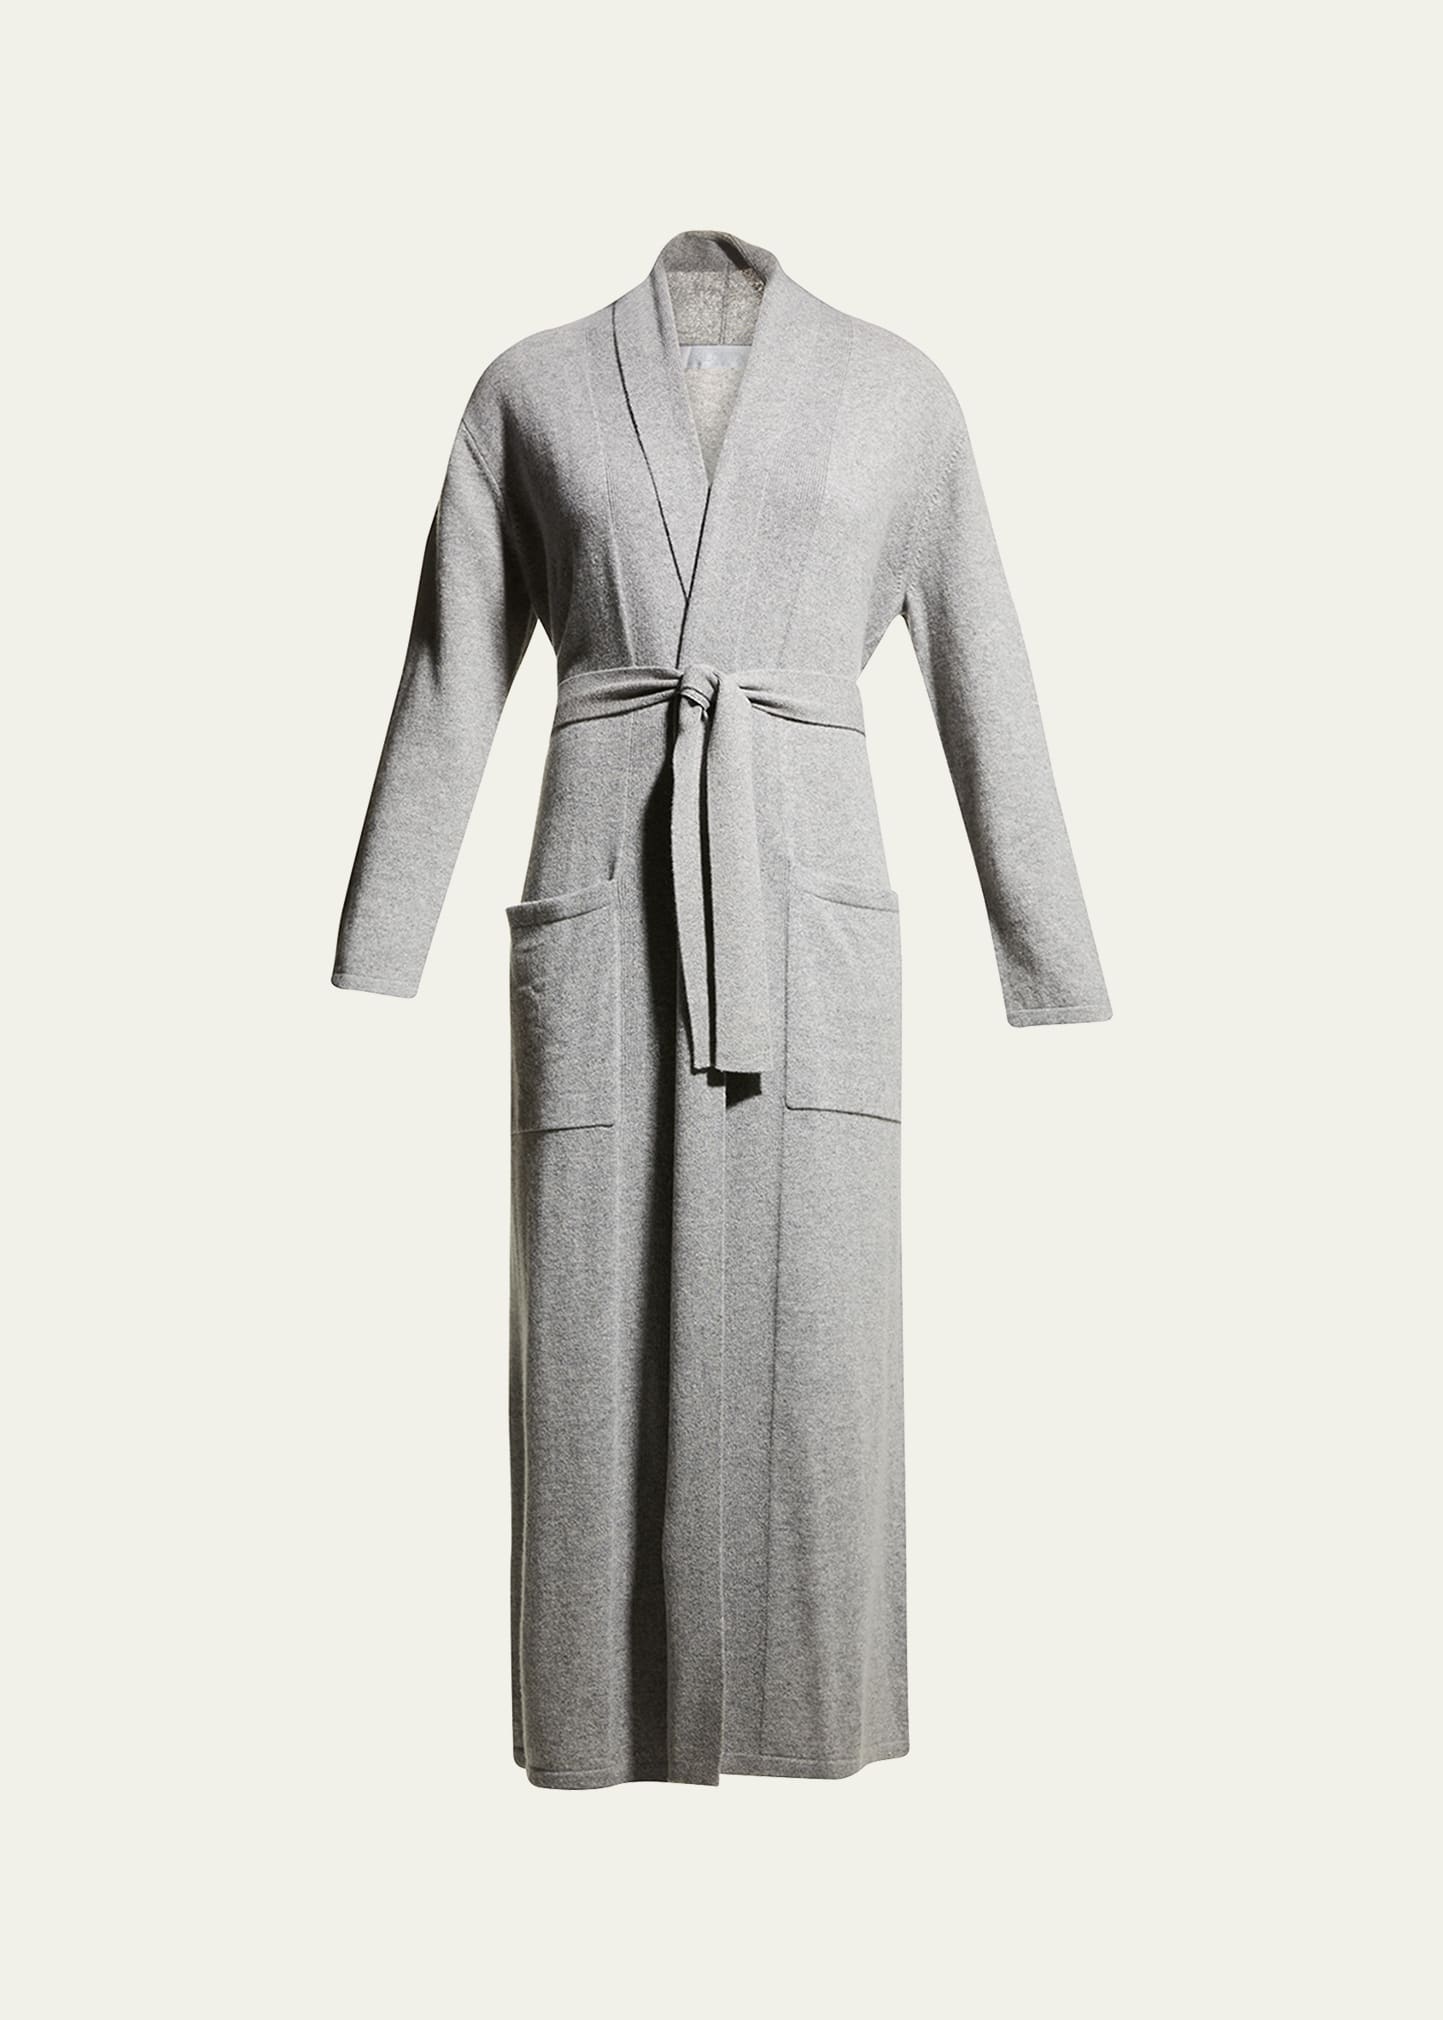 Long Cashmere Robe with Shawl Collar